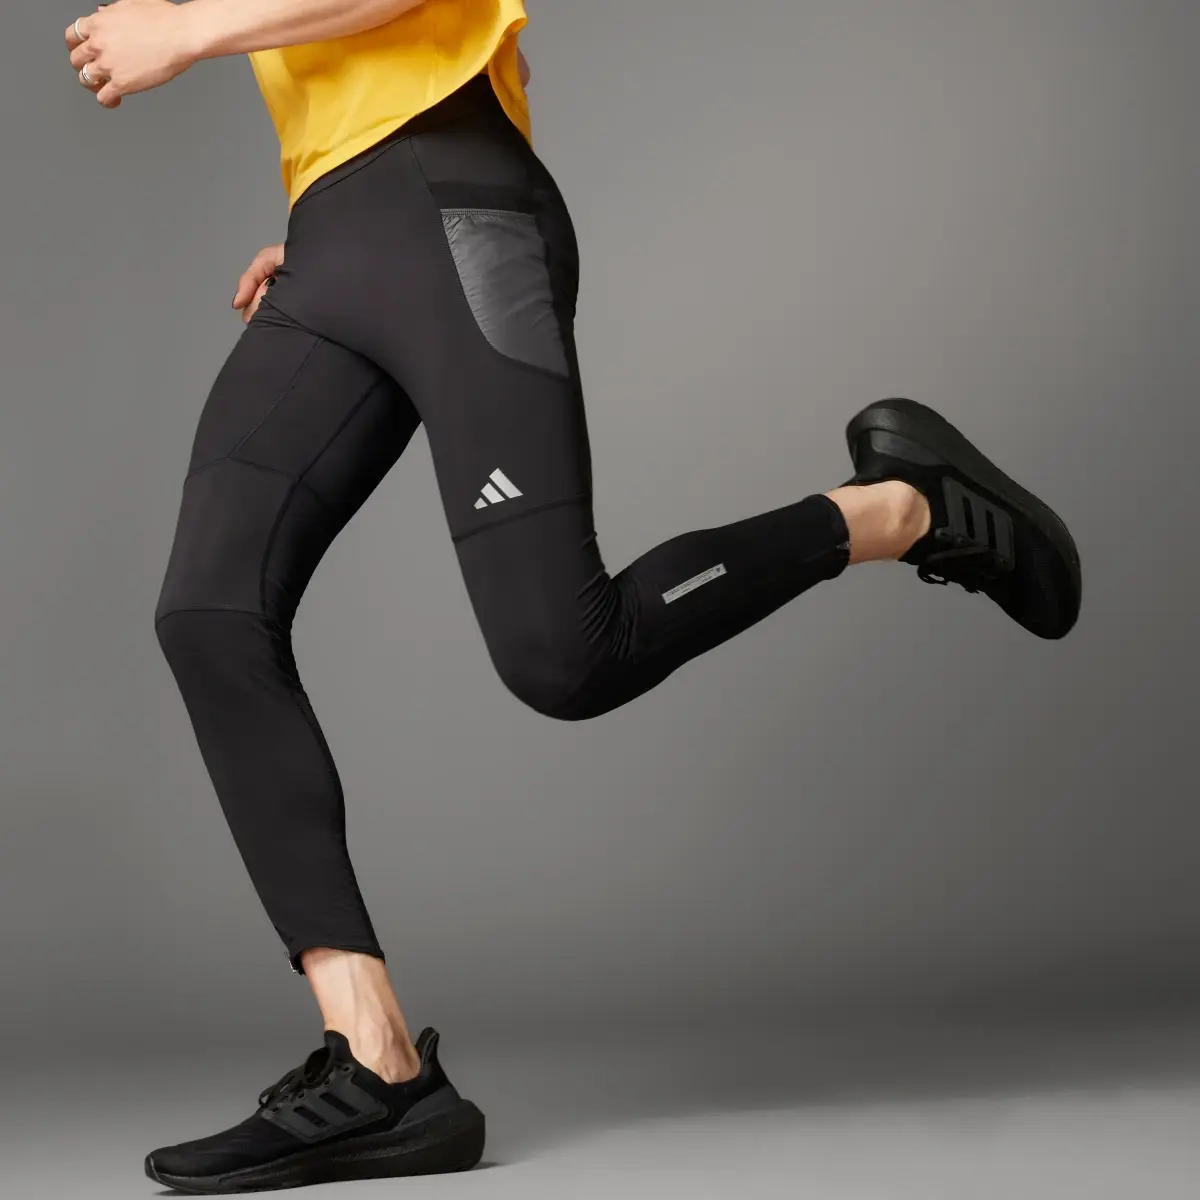 Adidas Legginsy Ultimate Running Conquer the Elements COLD.RDY. 1